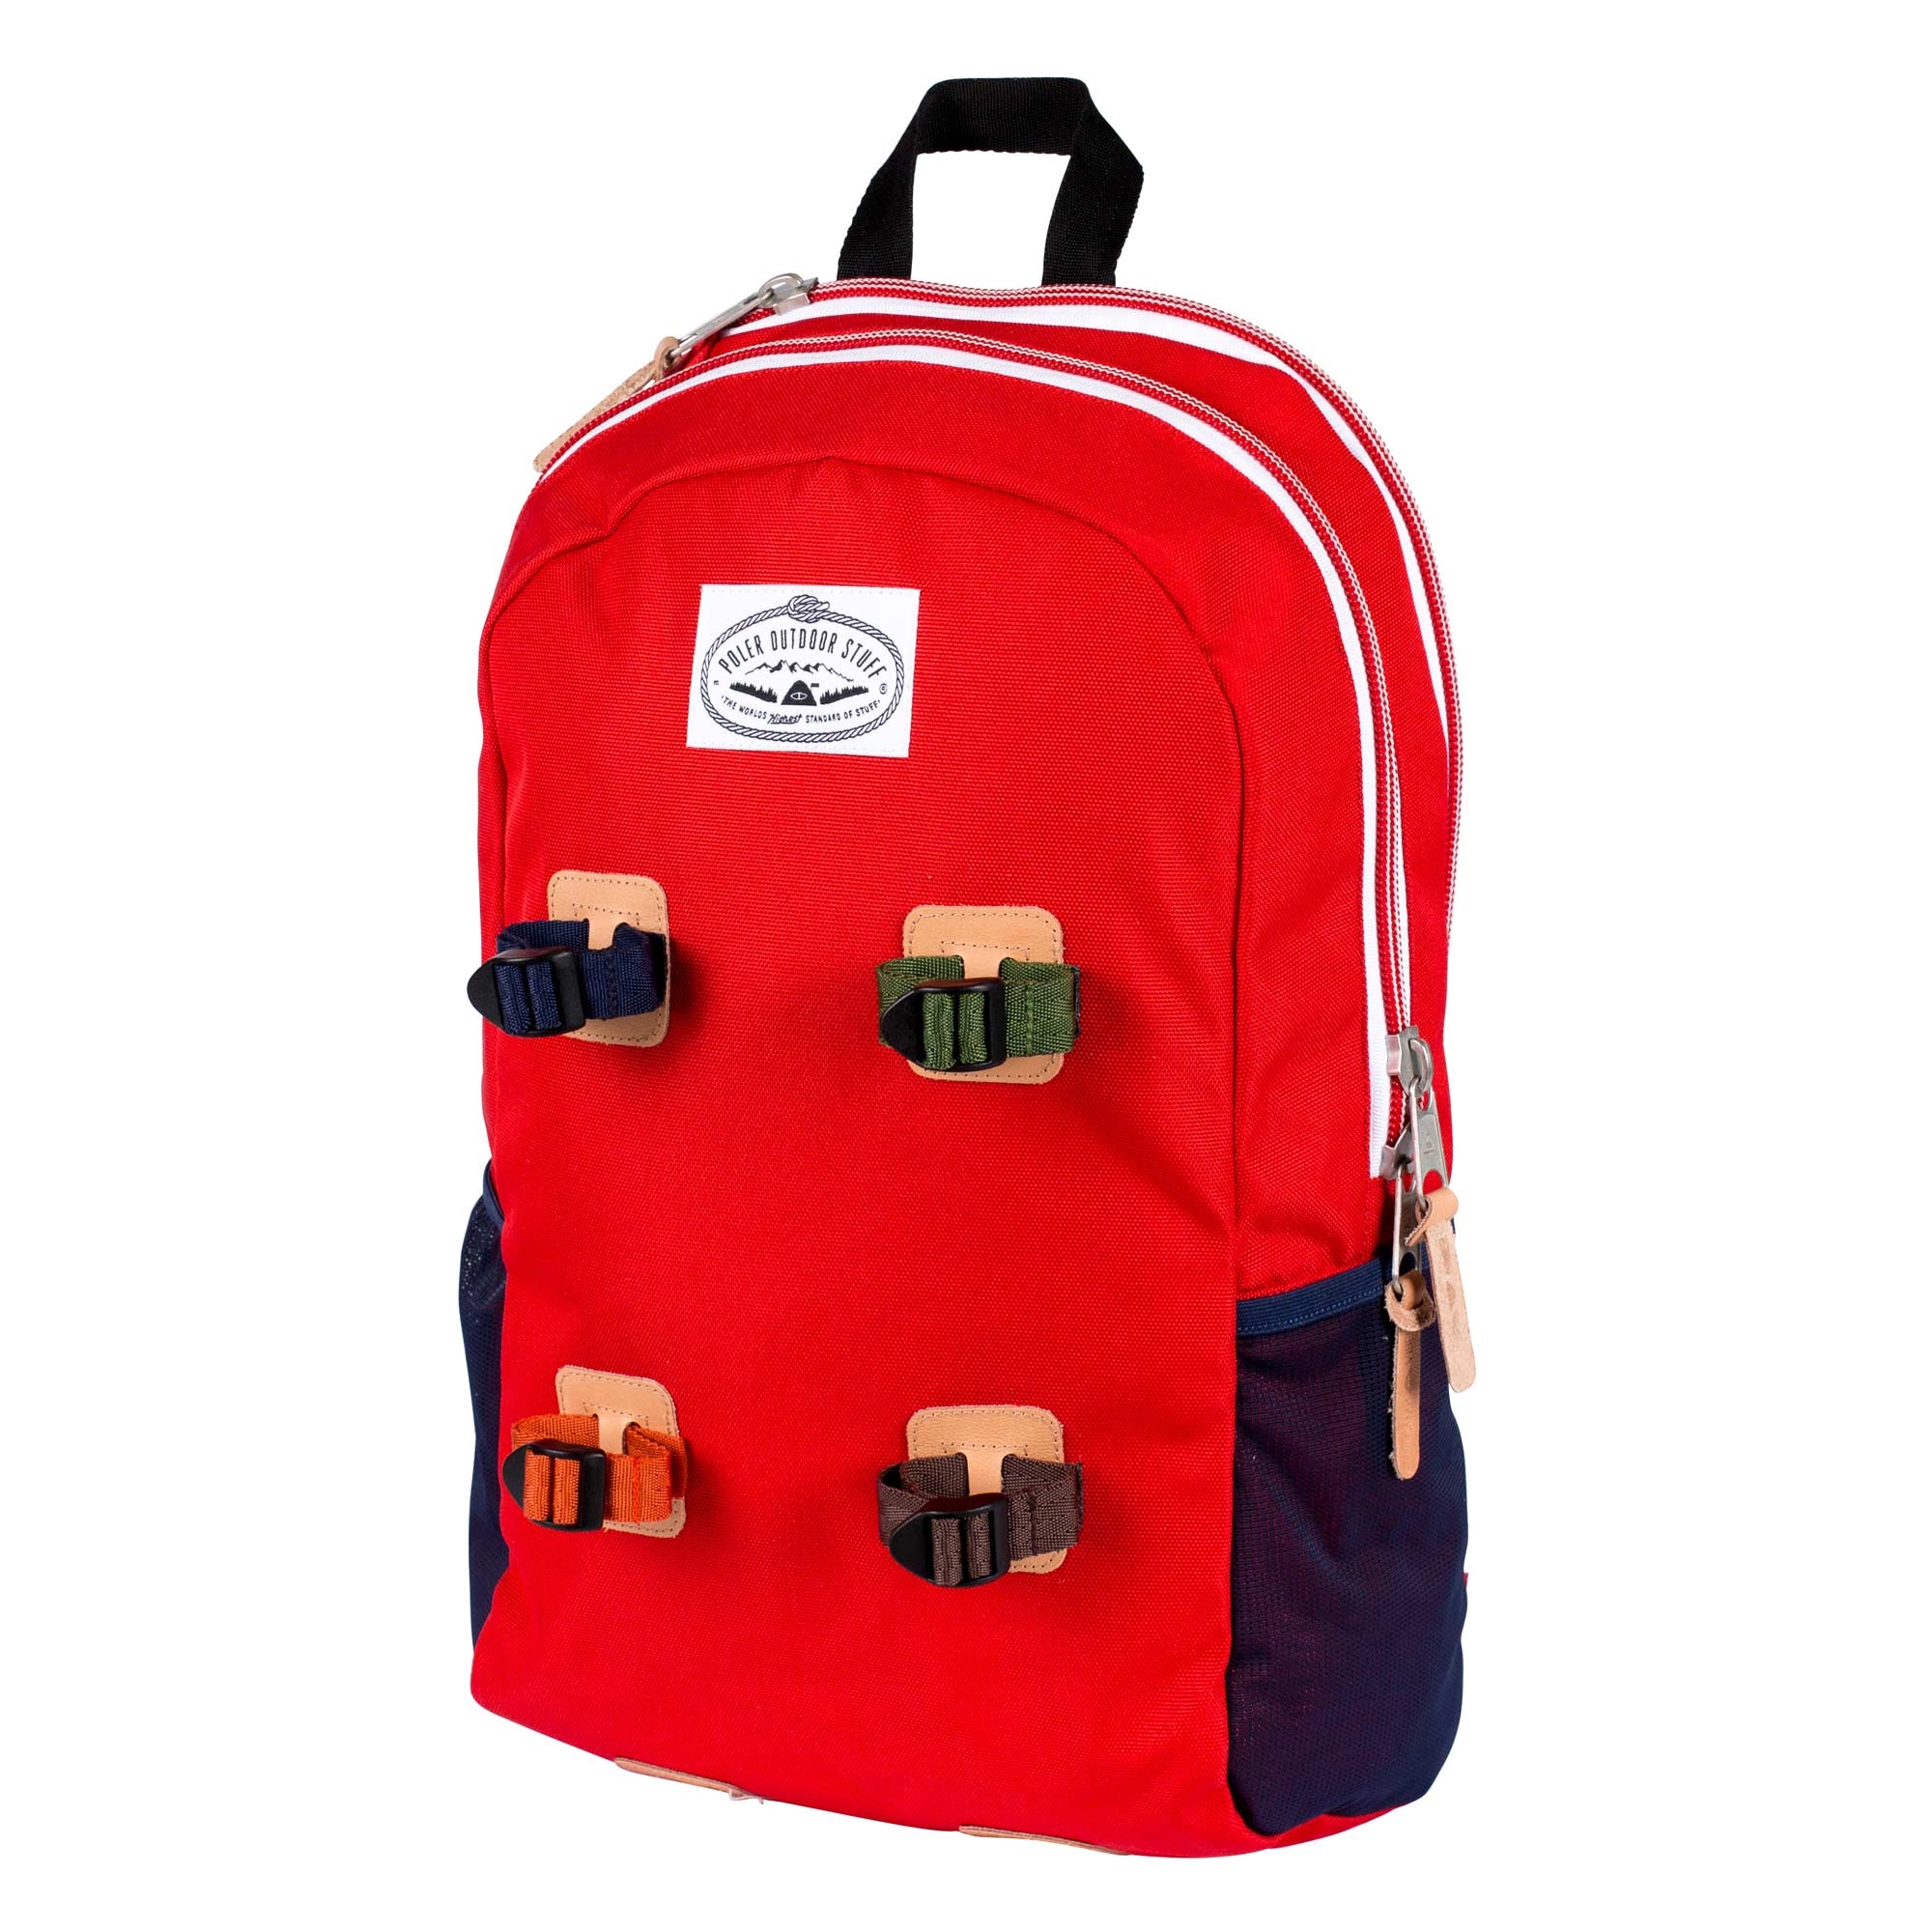 POLER Bag CLASSIC DAY PACK, bright red